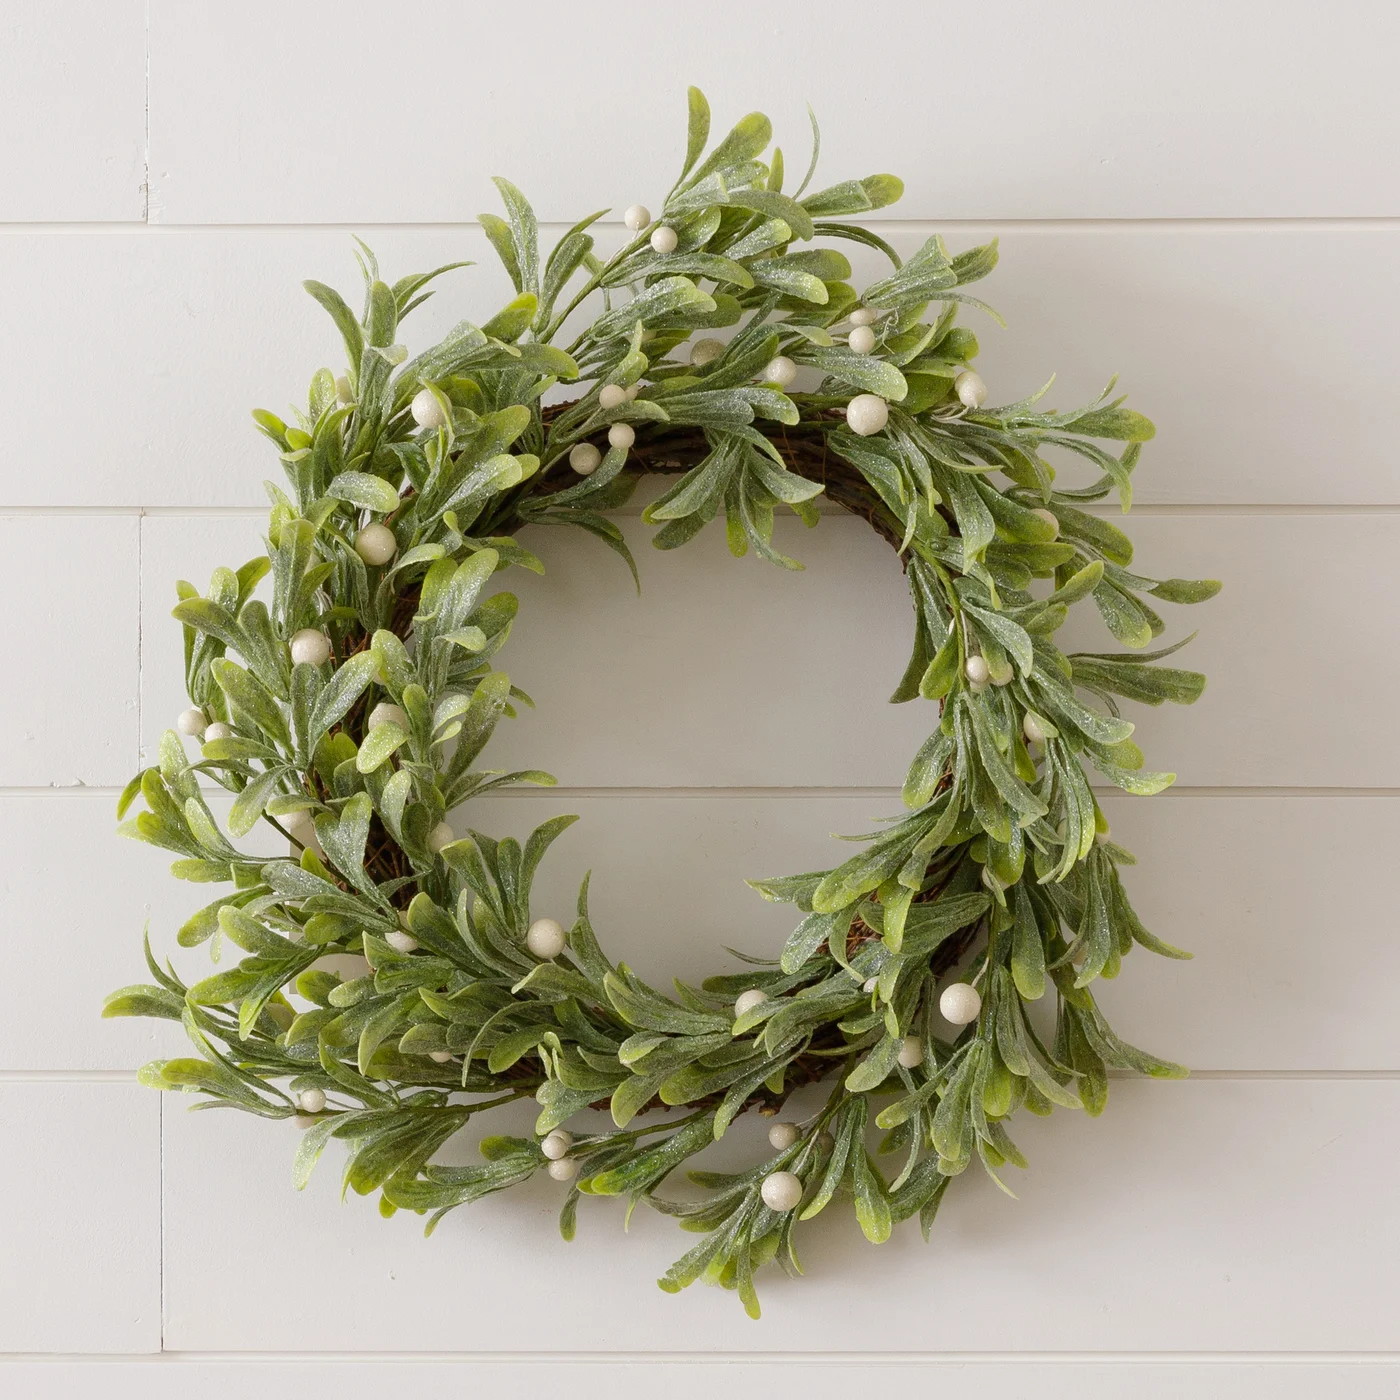 Frosted Mistletoe With Twig Base 18" Faux Foliage Wreath